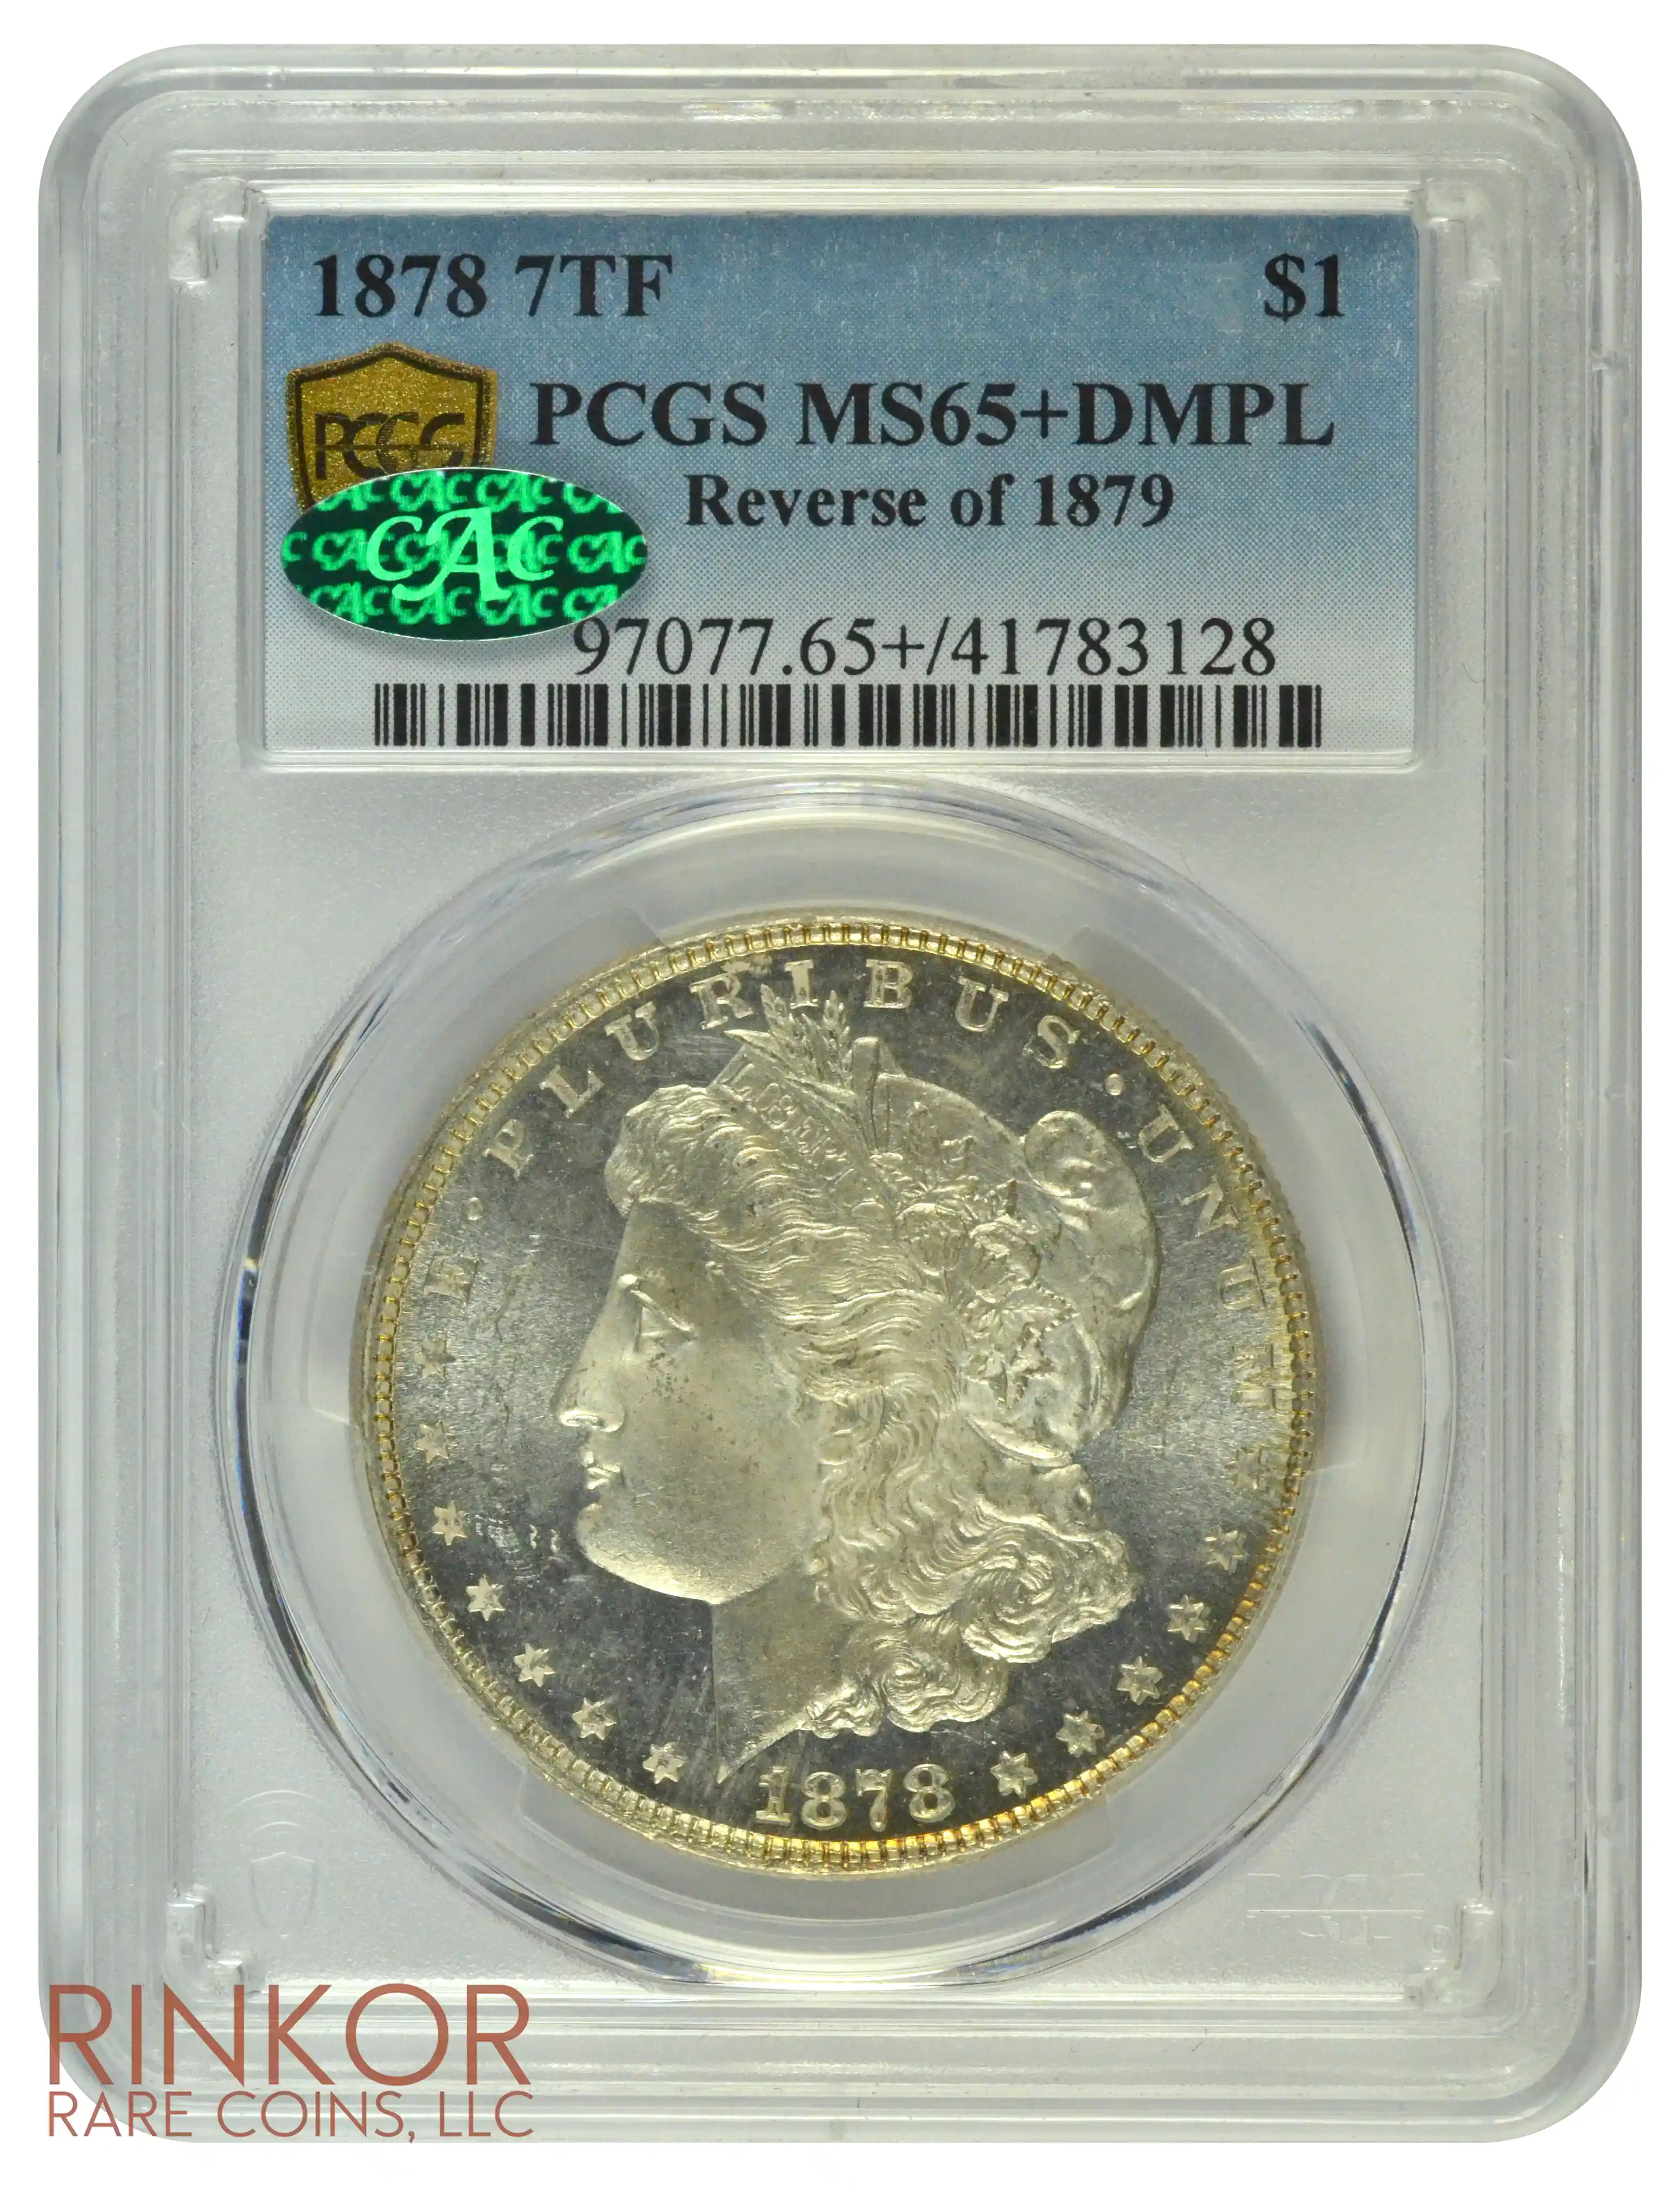 1878 7TF $1 Reverse of 1879 PCGS MS 65+ DMPL CAC